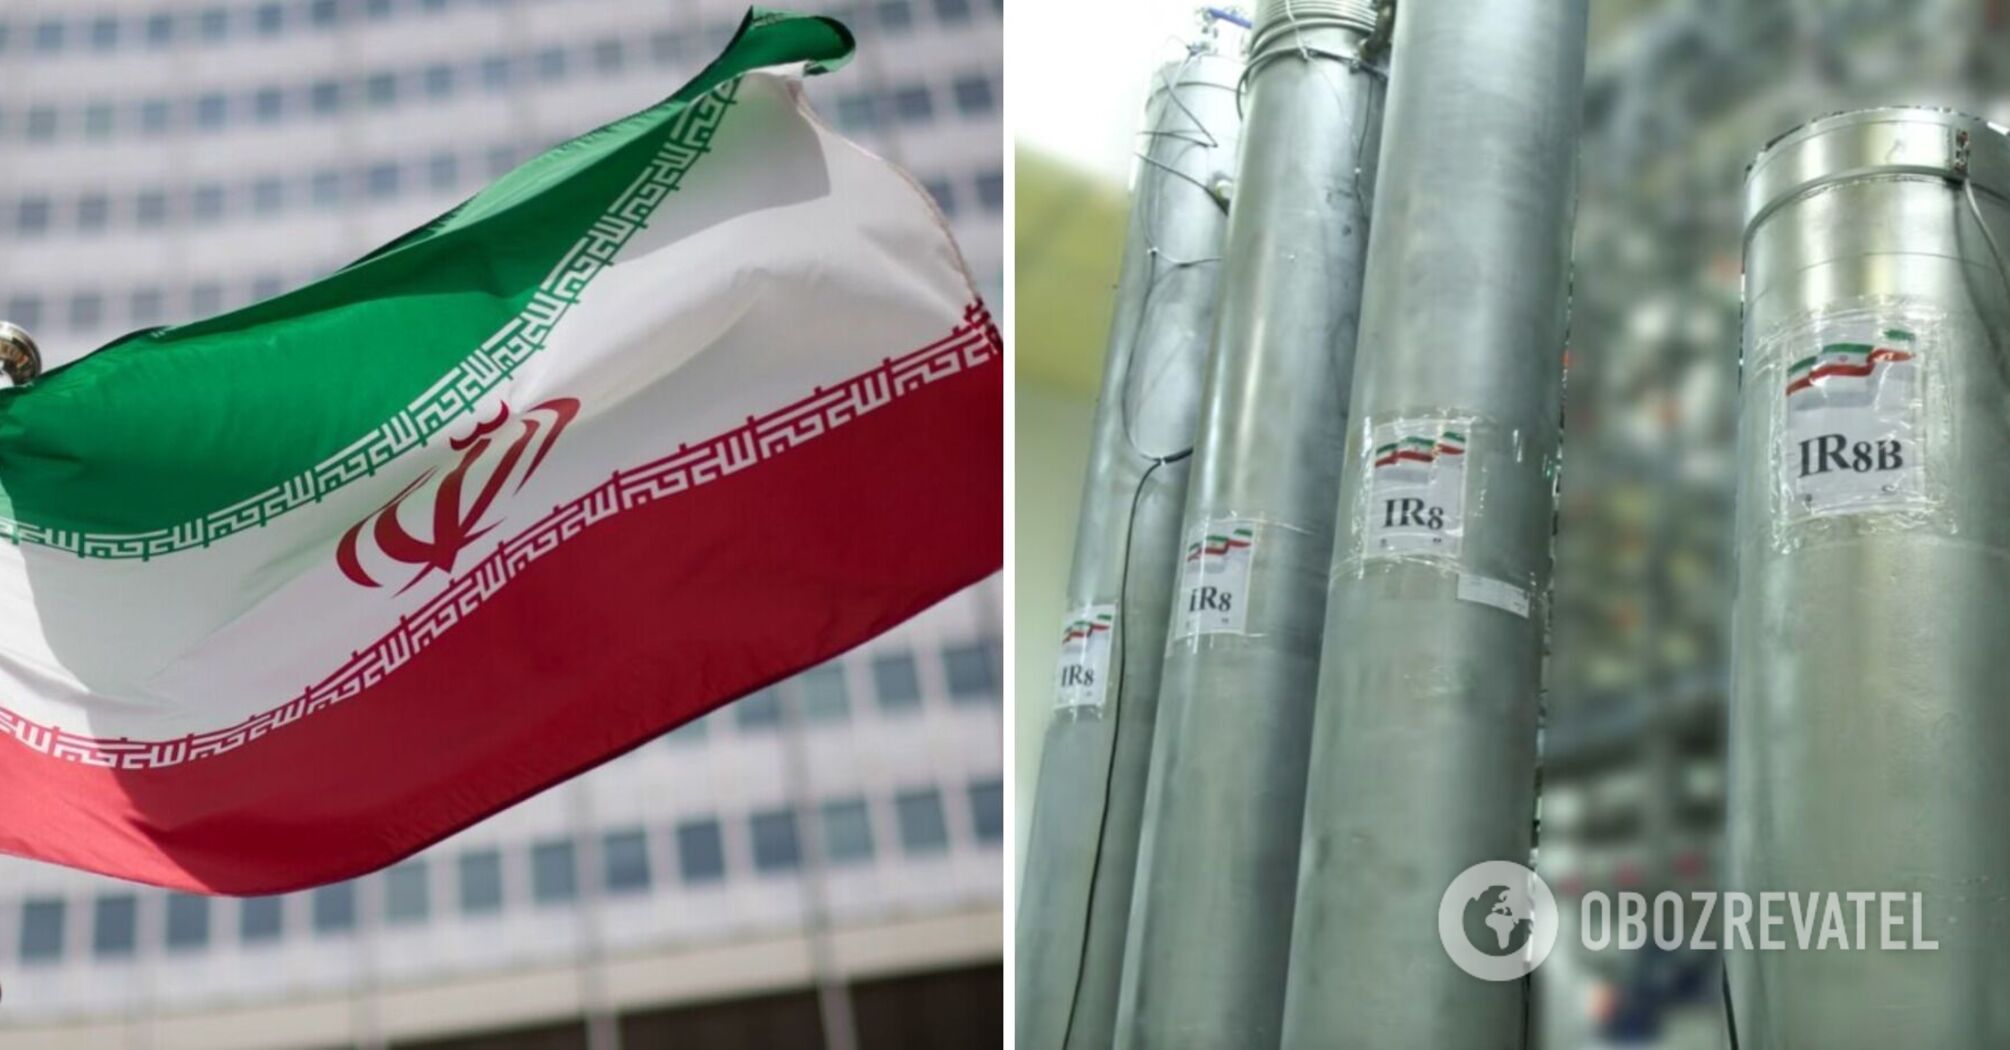 Iran continues to increase its stockpile of enriched uranium: the IAEA sounds the alarm